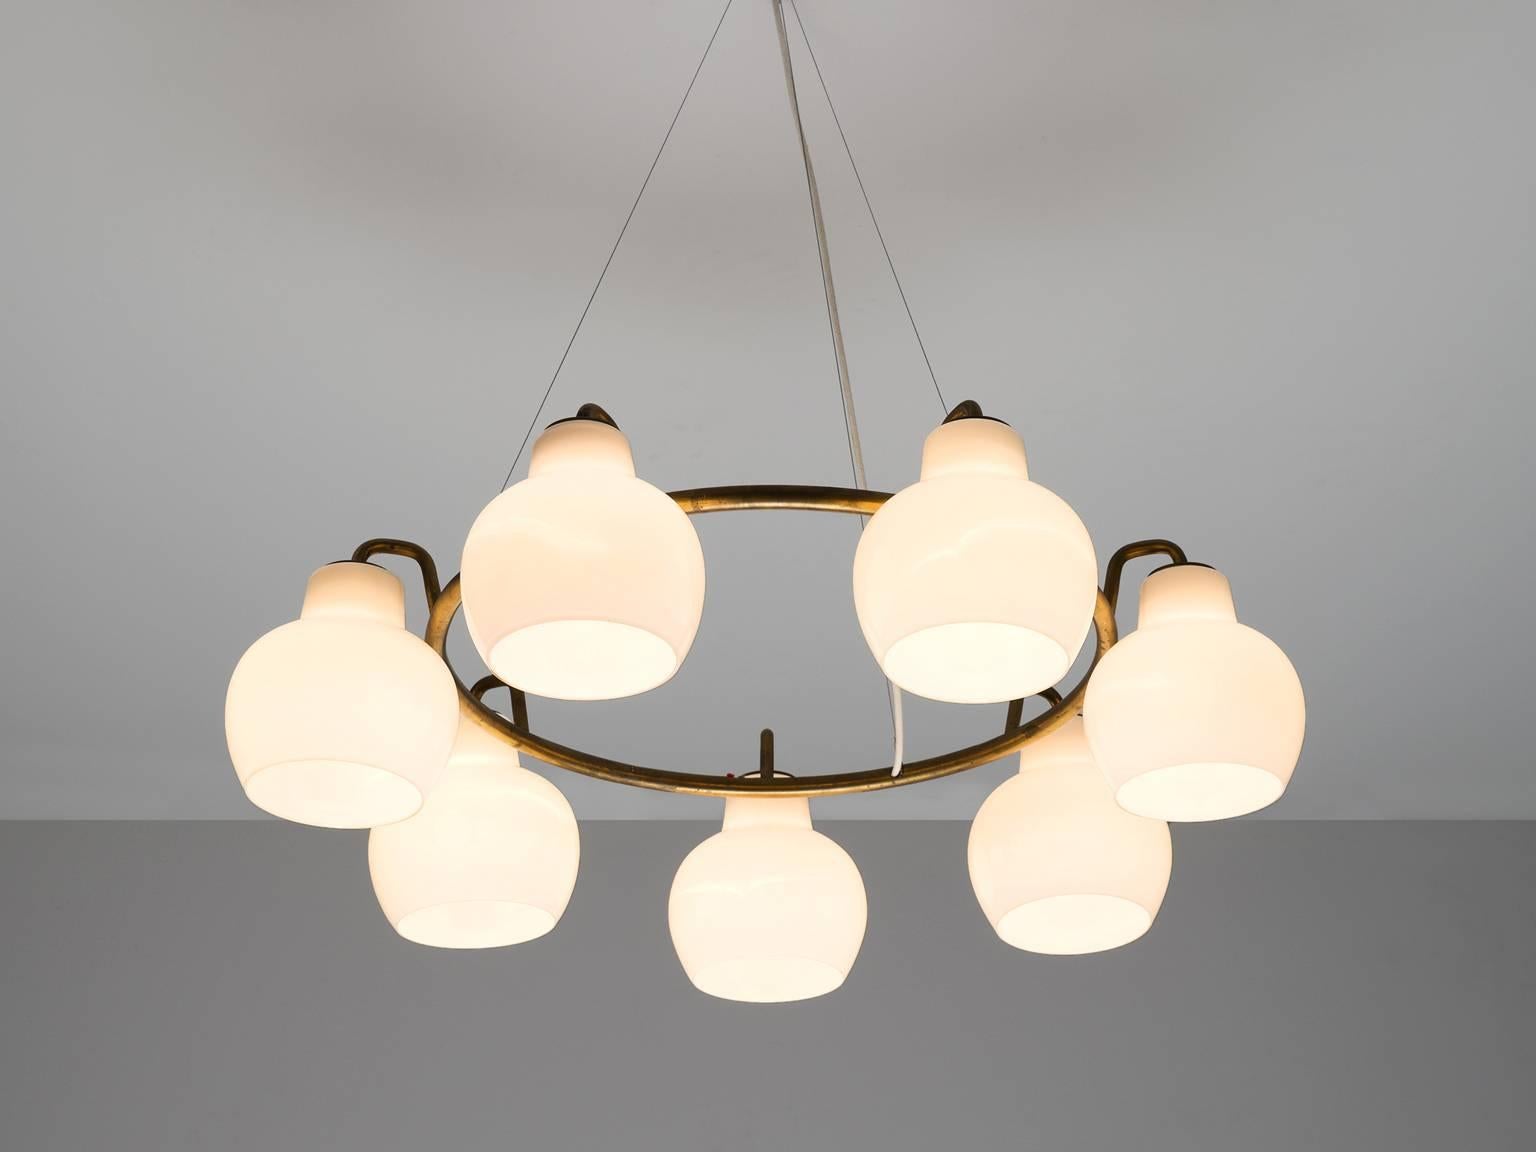 'Christiansborg' chandelier, in brass and opaline glass, by Vilhelm Lauritzen for Louis Poulsen, Denmark, 1950s.

The brass finished ring contains seven opaline glass shades with a shiny finish to create an excellent light partition. The frame